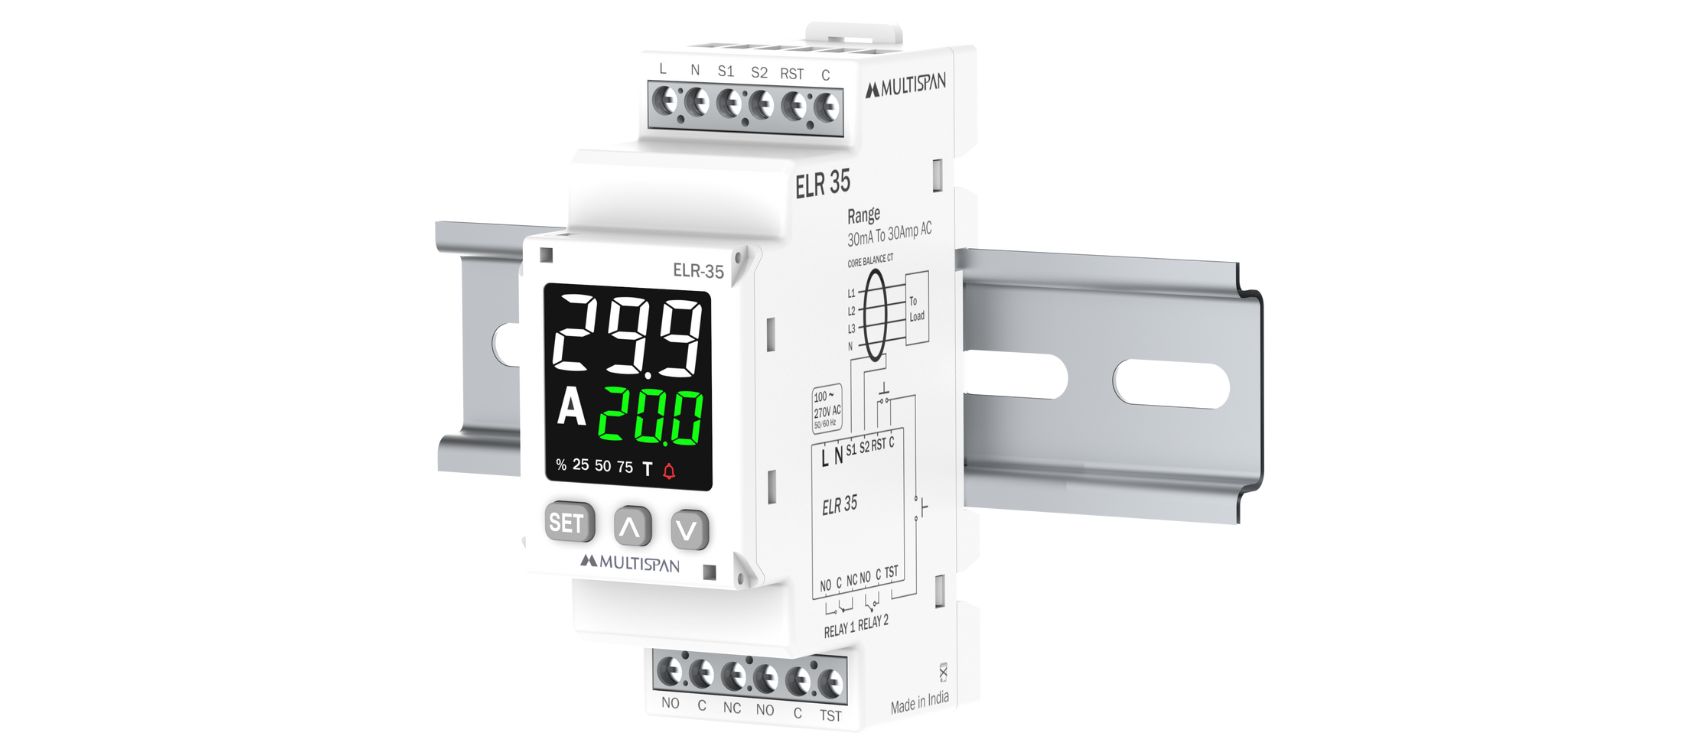 ELR-35 DIN Rail with Display - Industrial Control Equipment - product image